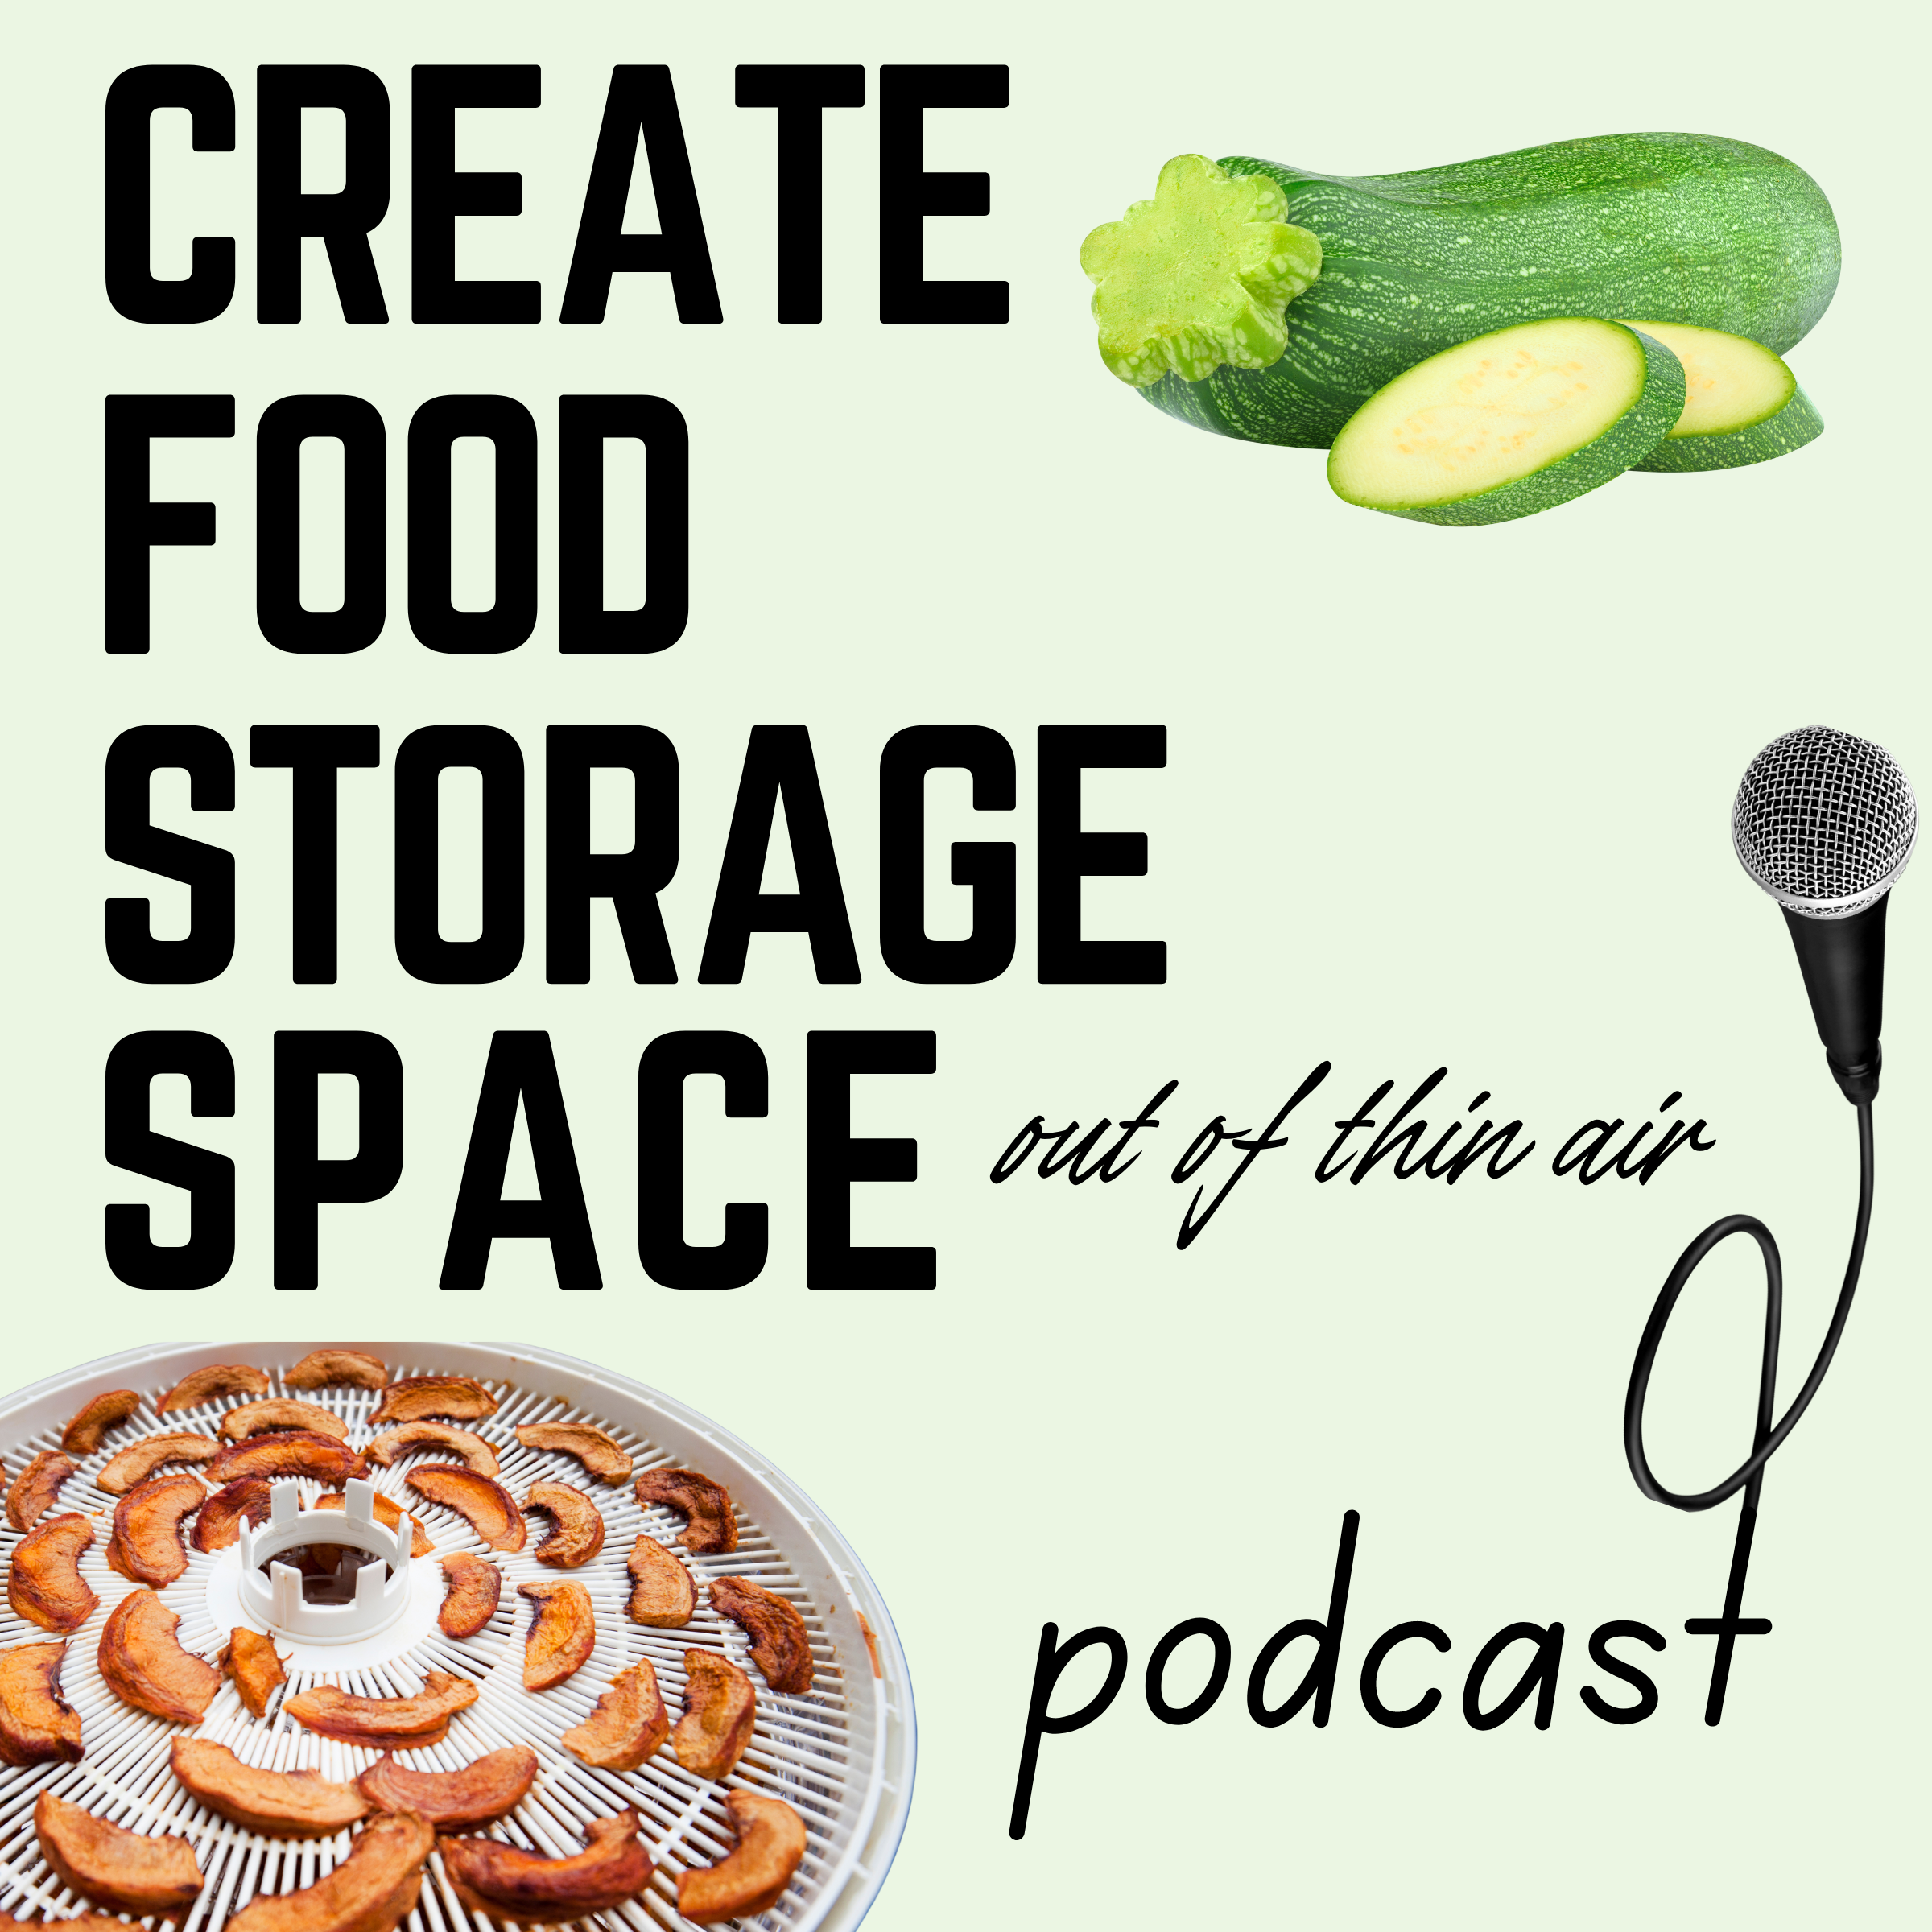 Podcast Create Food Storage Space Out of Thin Air